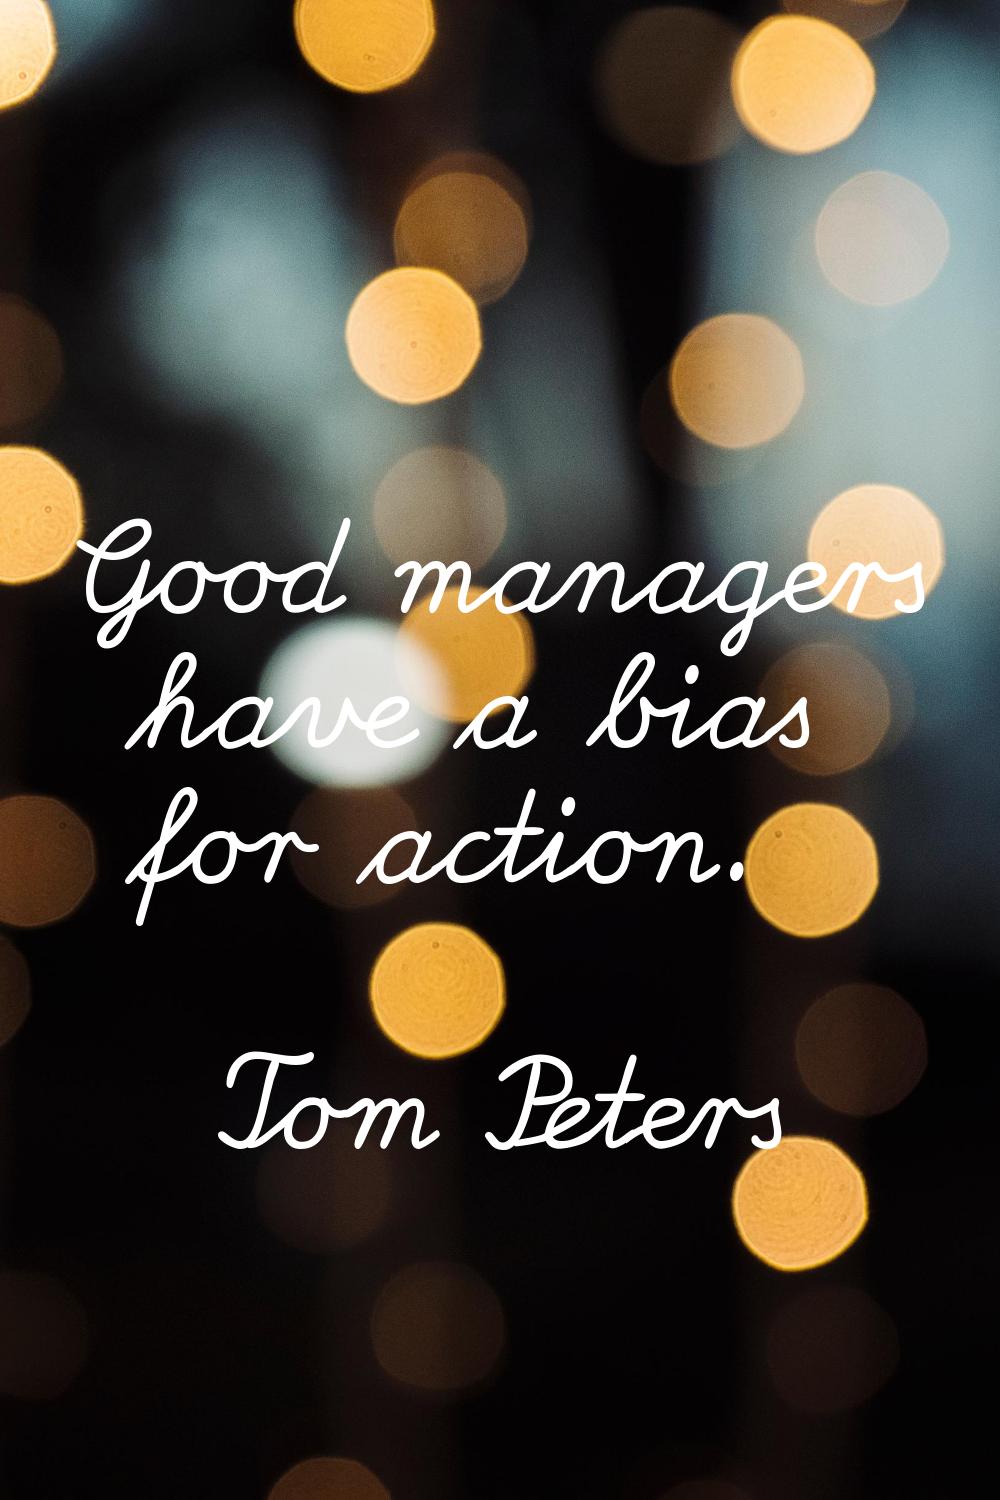 Good managers have a bias for action.